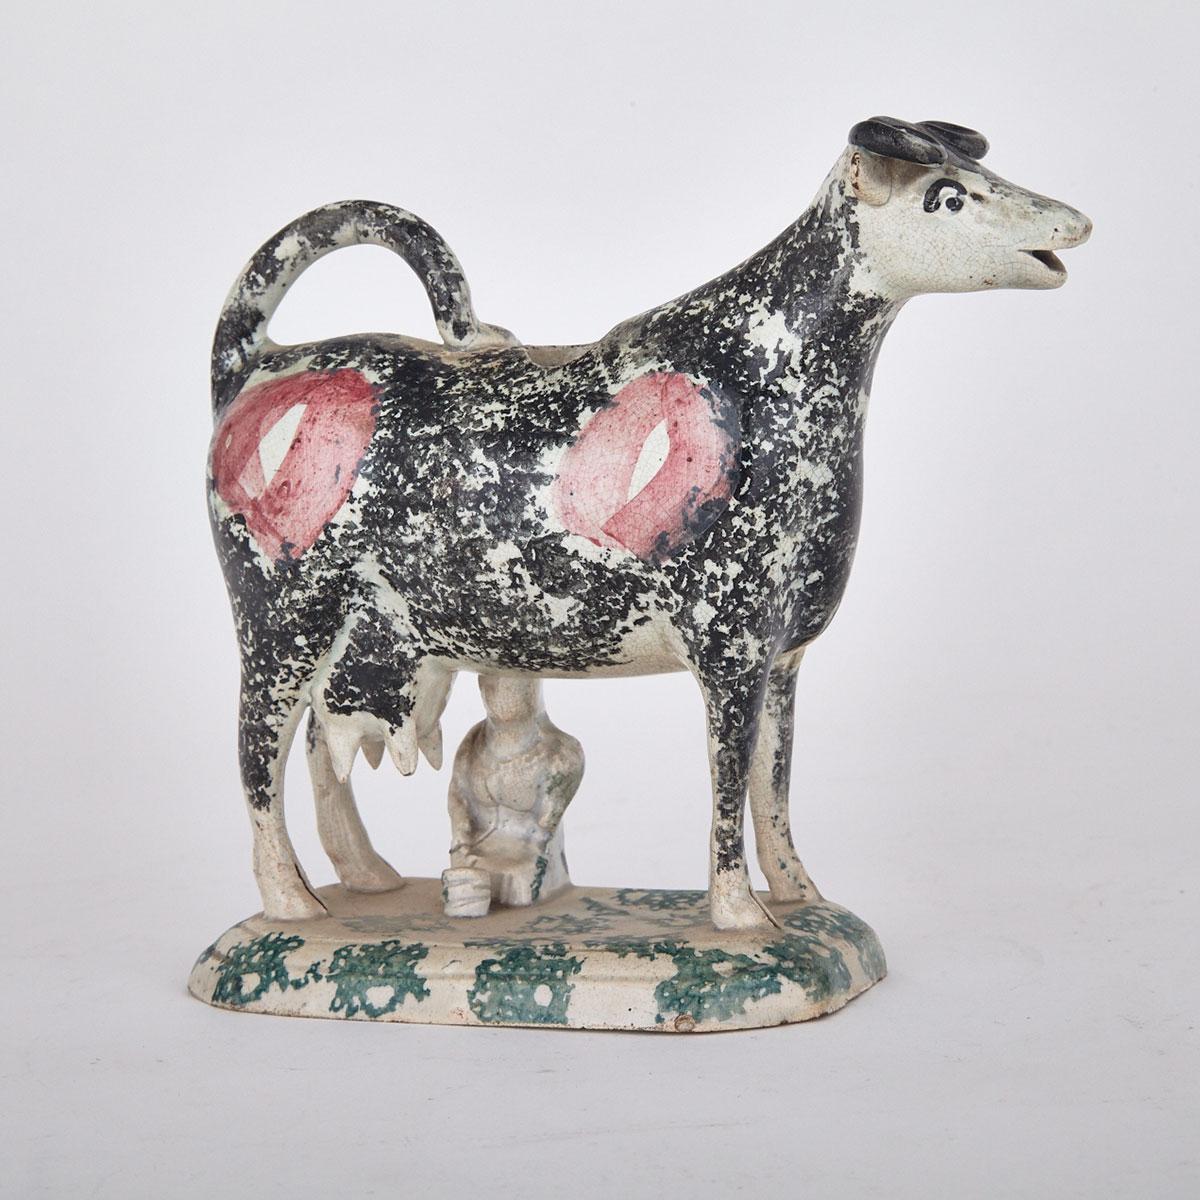 Staffordshire Pottery Cow Creamer, Early 19th Century